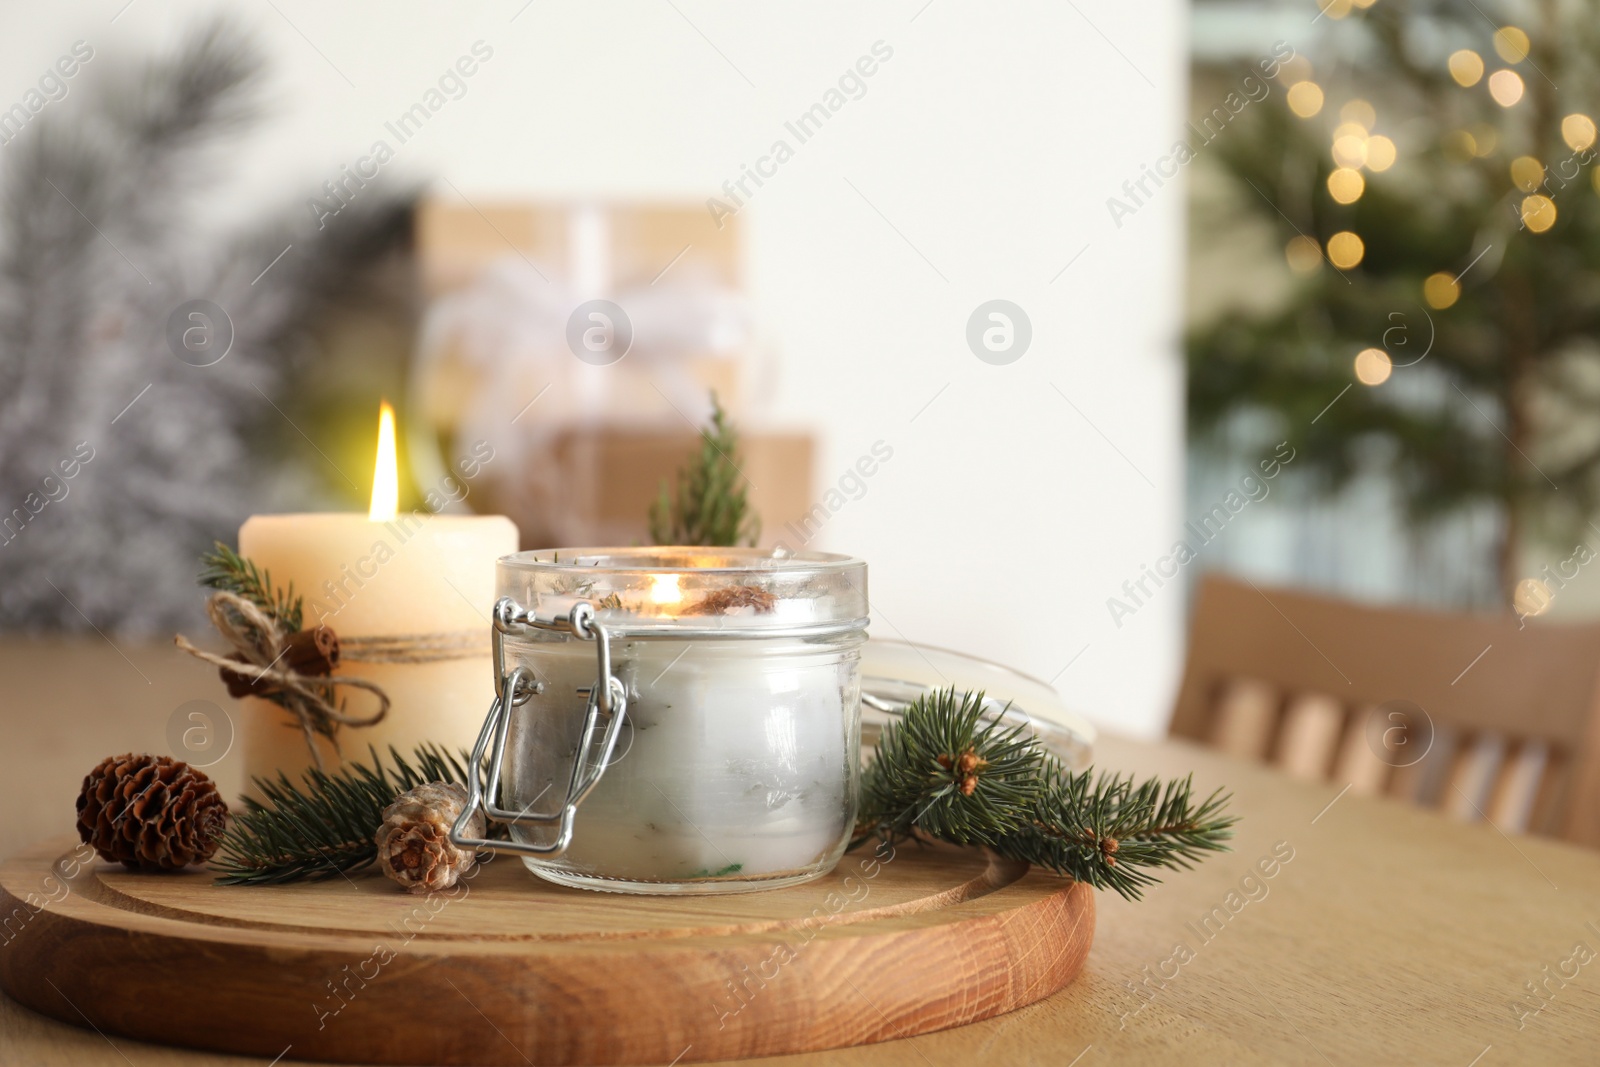 Photo of Burning scented conifer candles and Christmas decor on wooden table indoors. Space for text